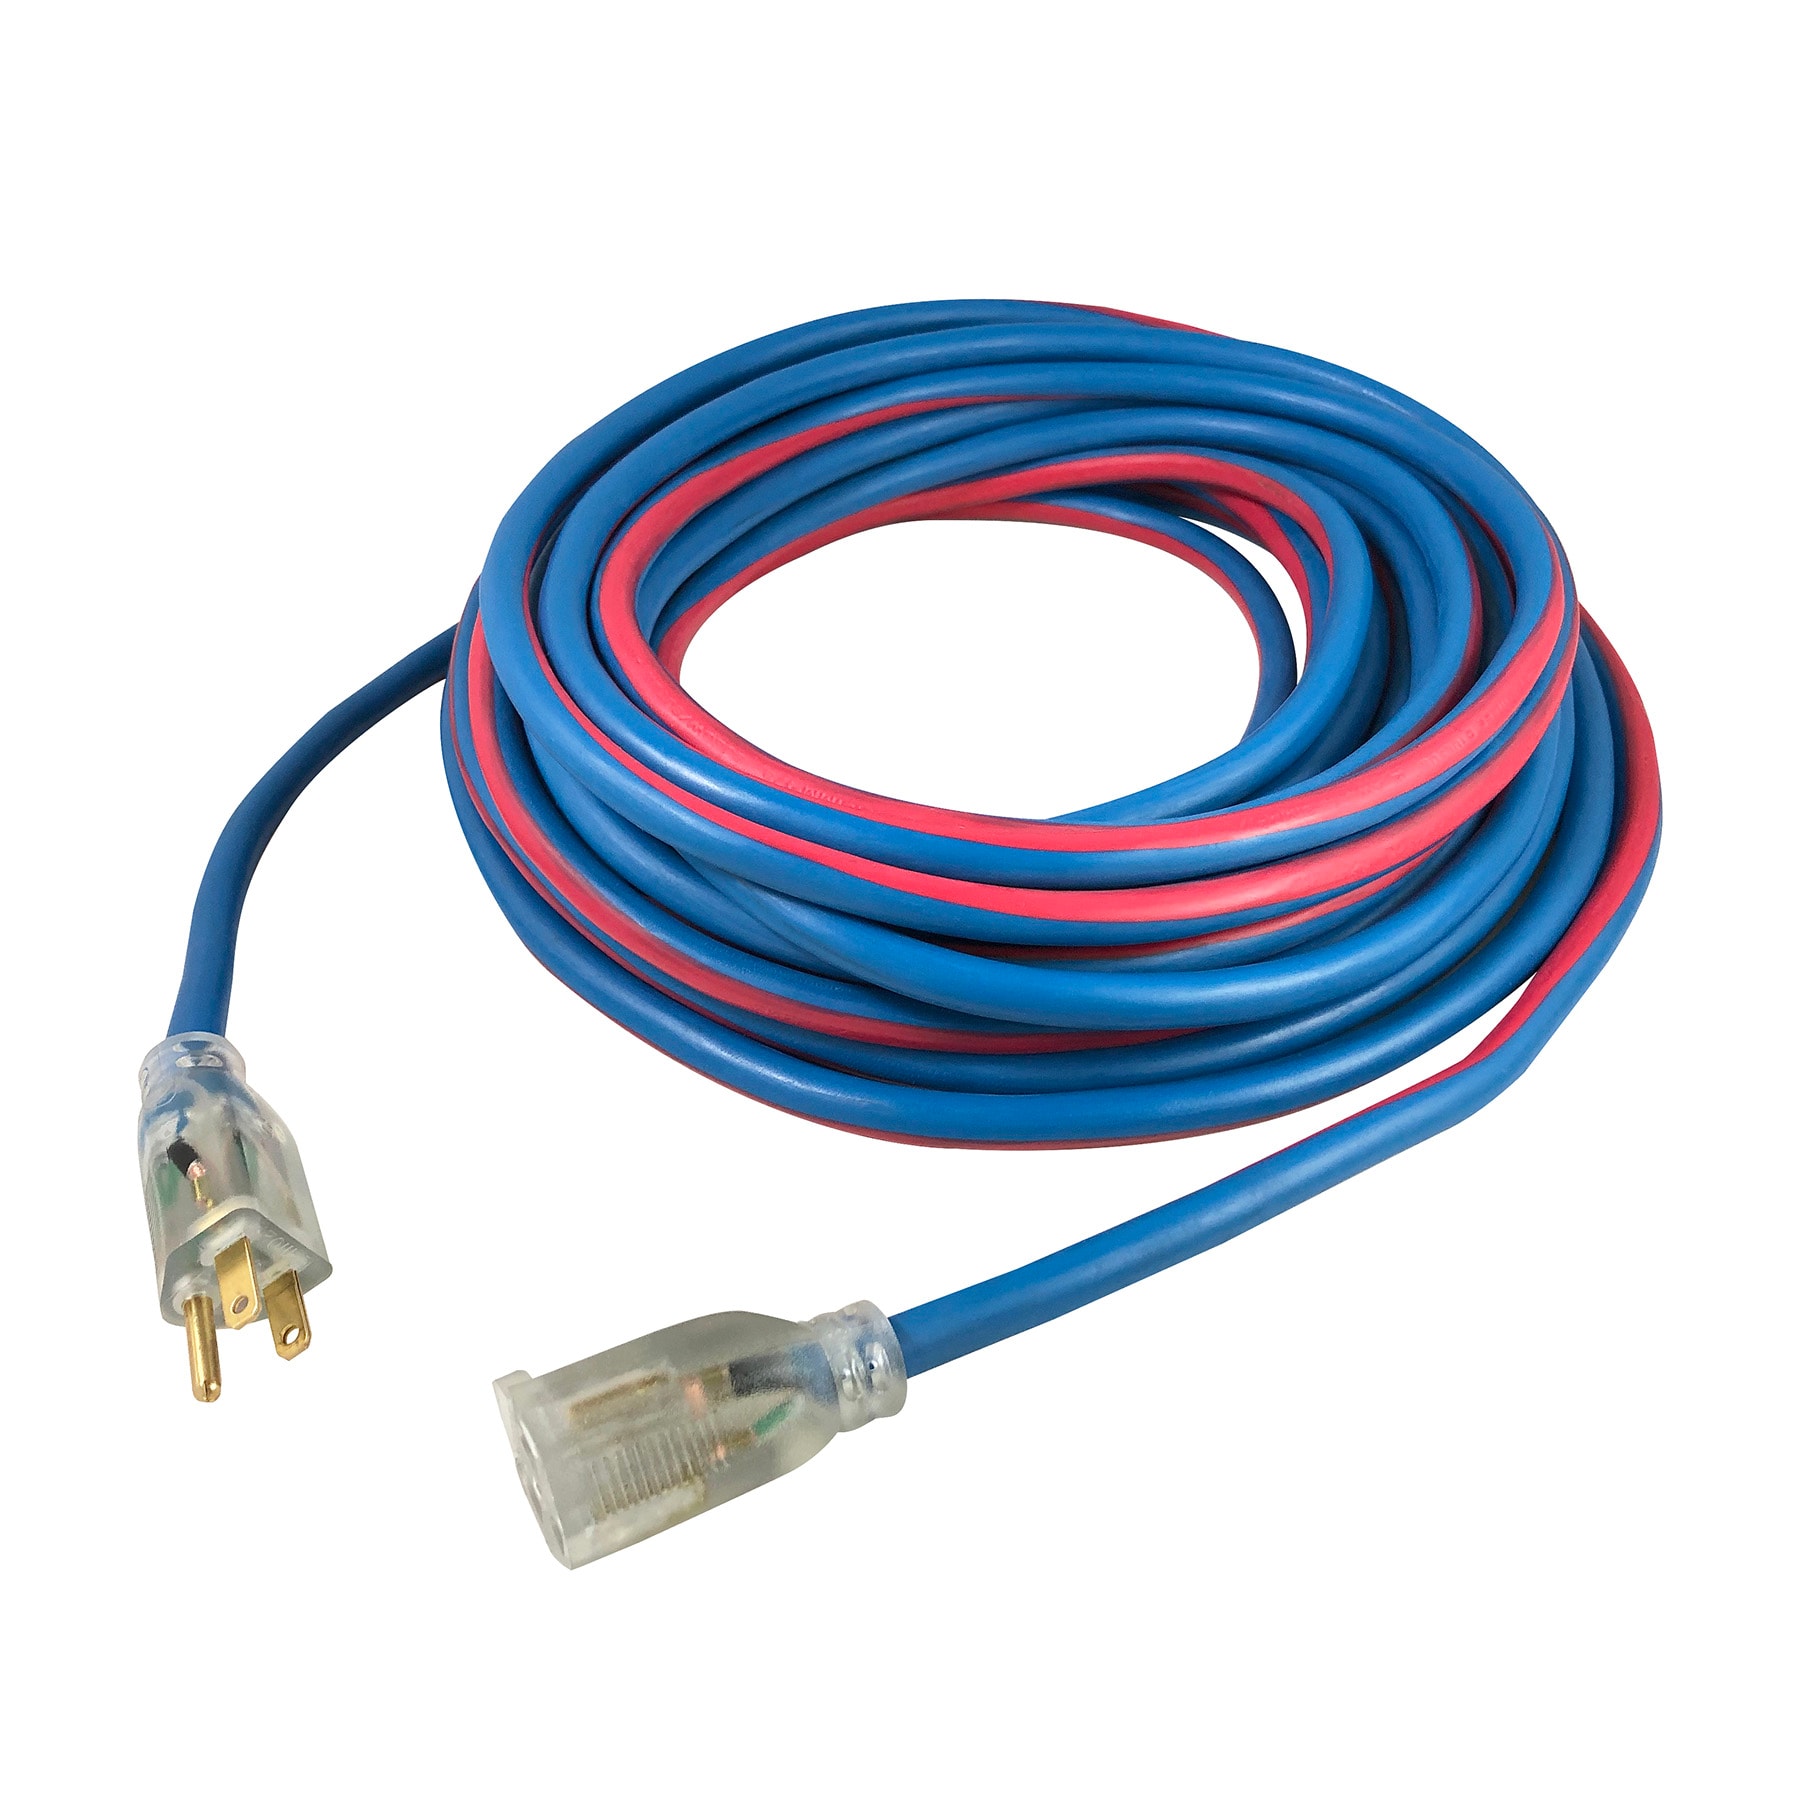 Extension Cord, 50', Blue/Red